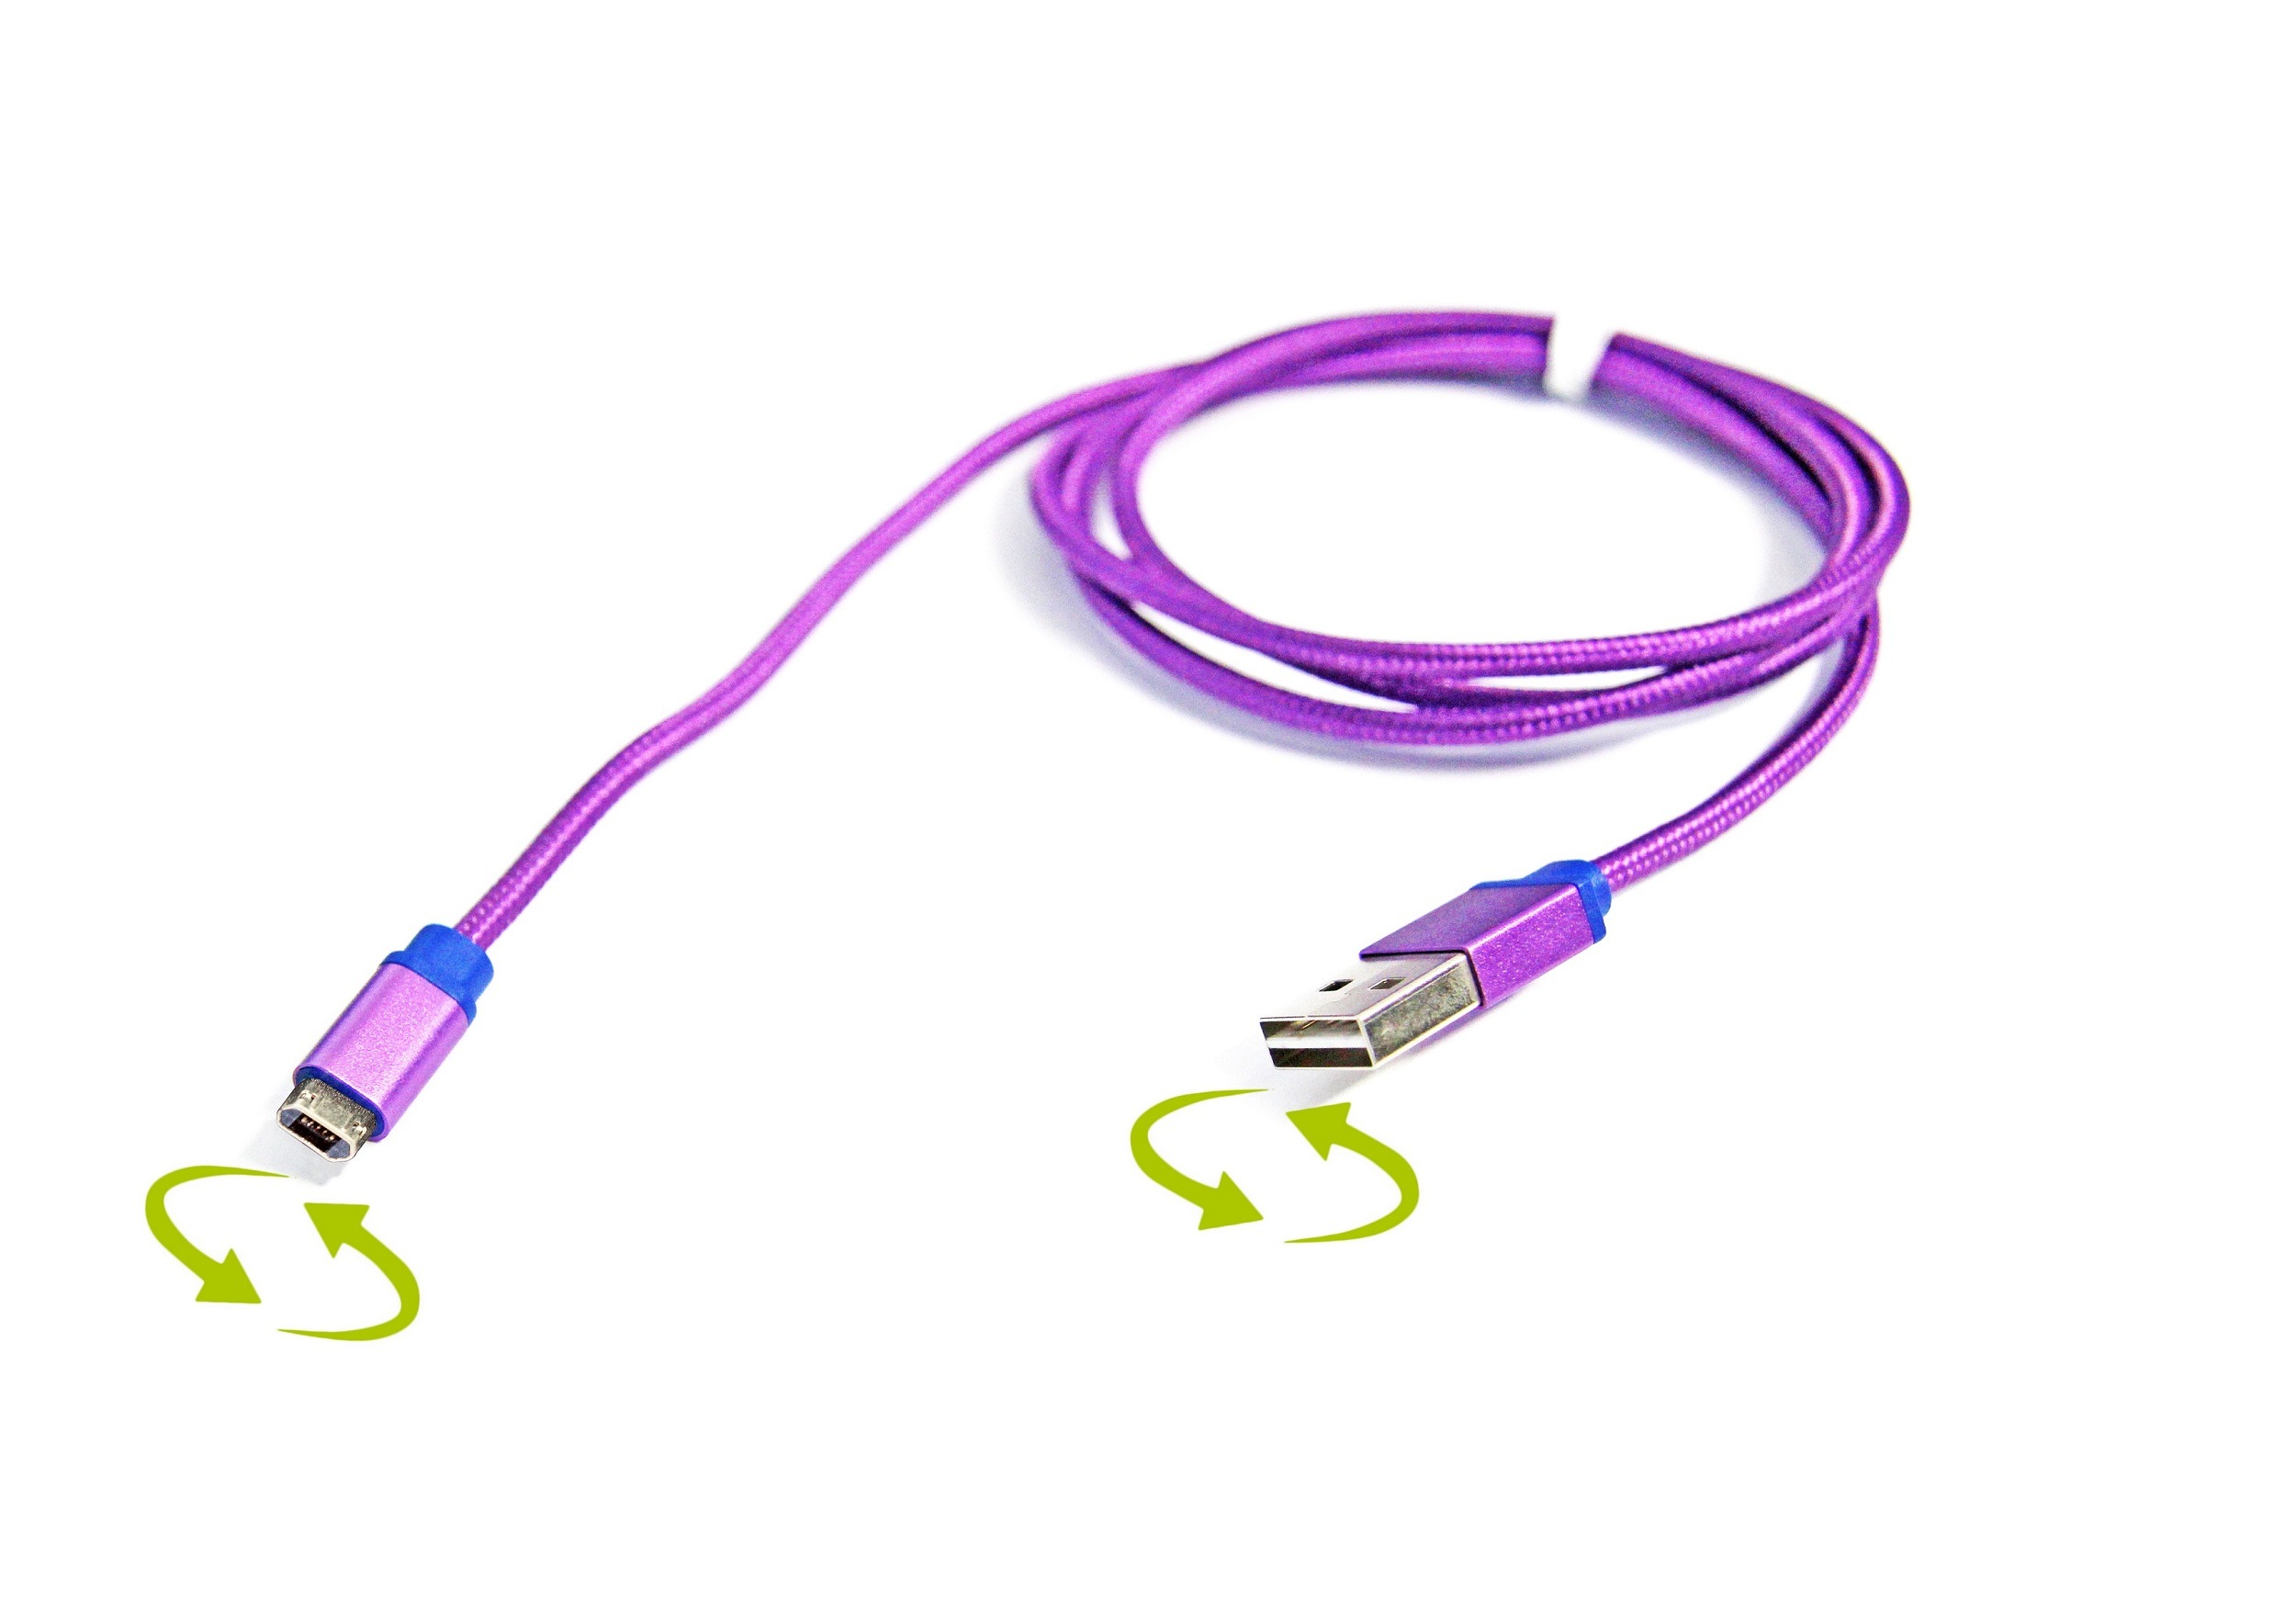 Reversible USB Connector Cable